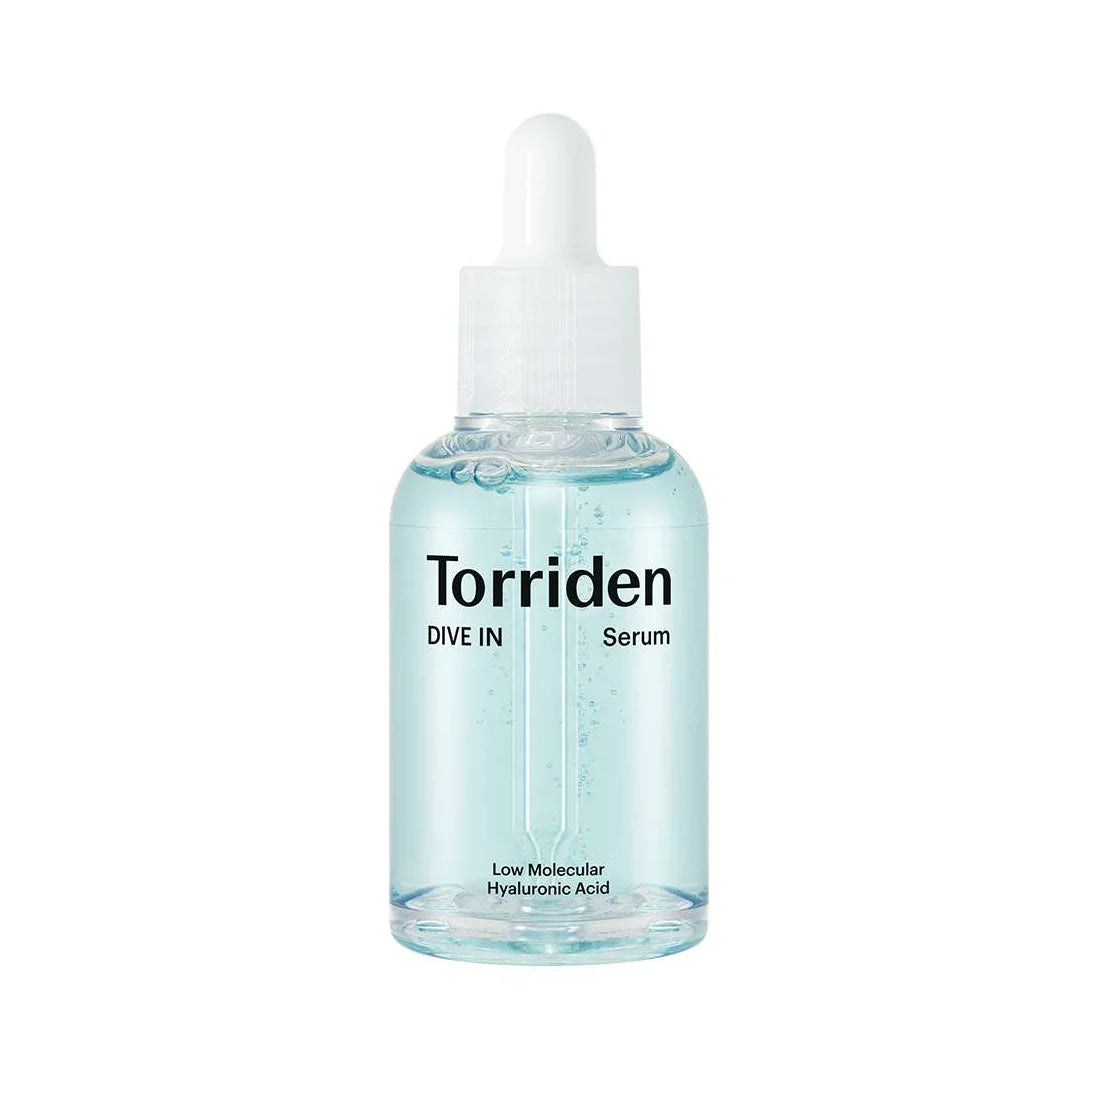 Torriden DIVE-IN Low Molecular Hyaluronic Acid Serum best Korean hydrating skin care for dry dehydrated oily combination irritated mature skin fine lines wrinkles K Beauty World